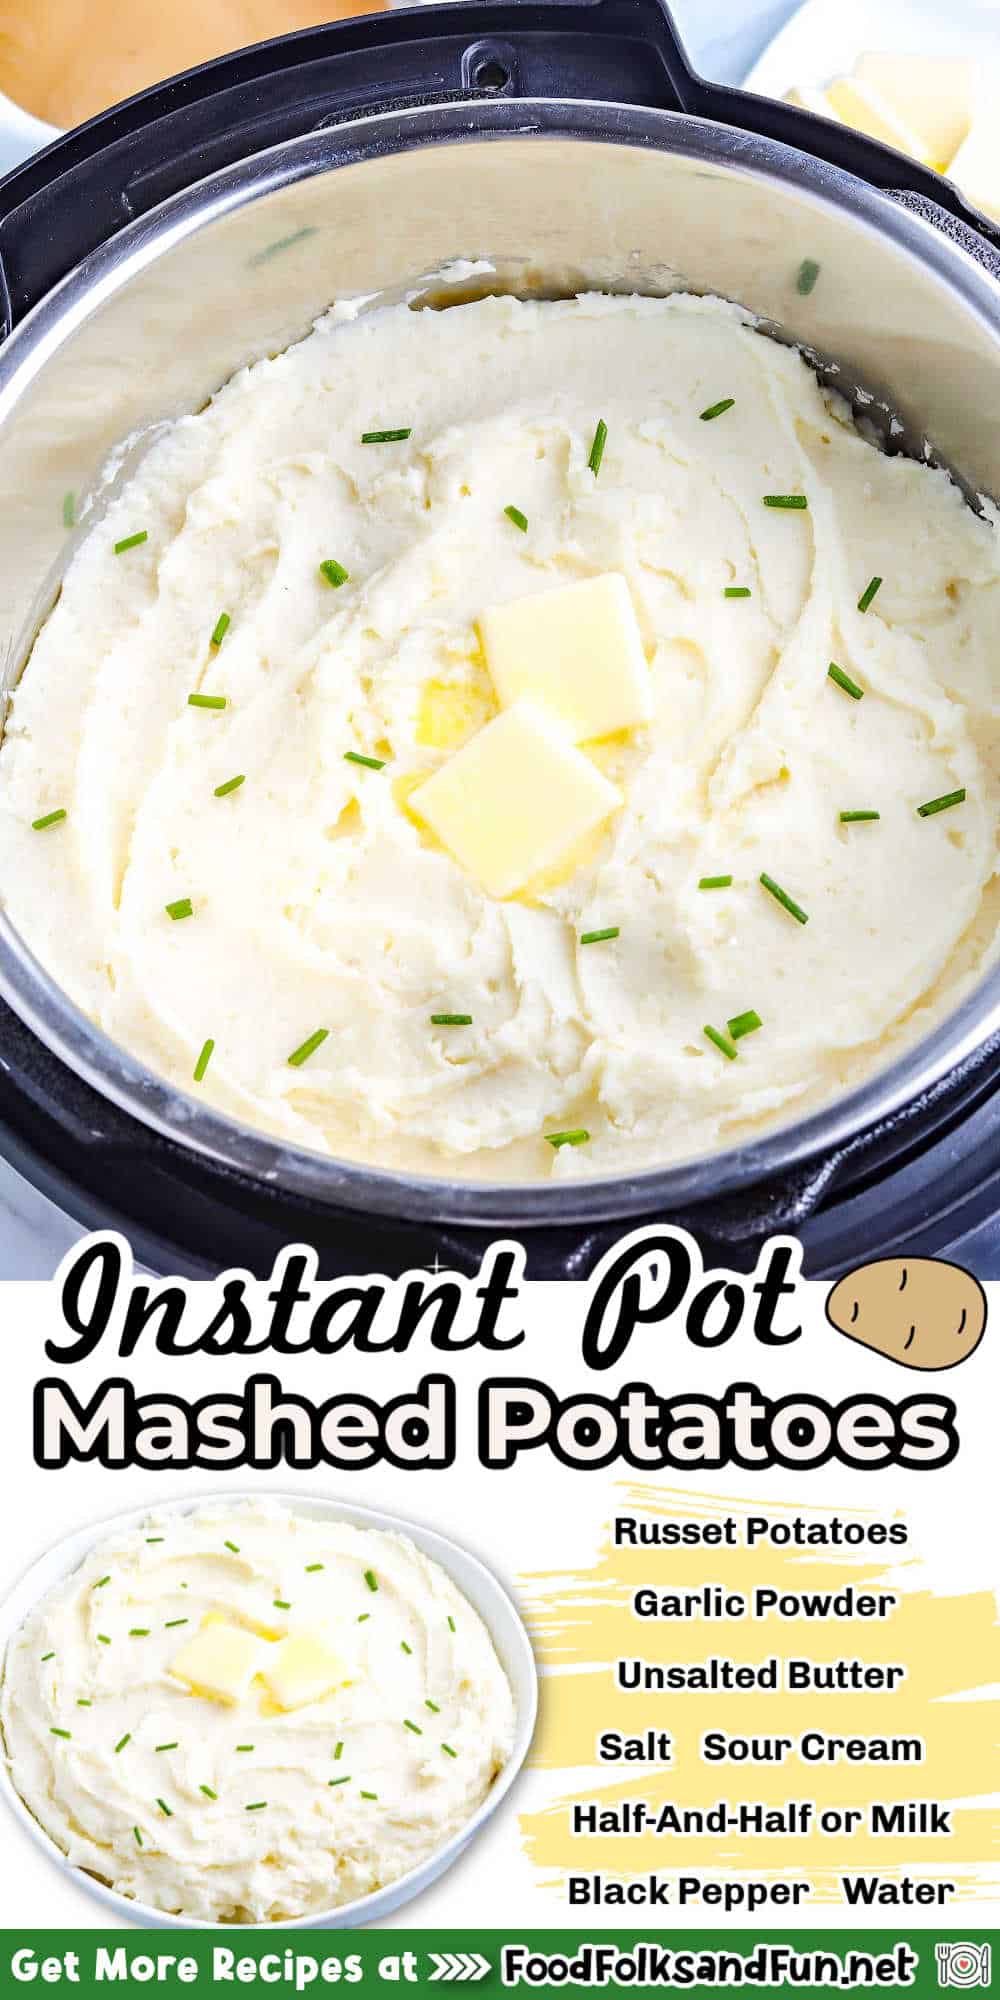 Instant Pot Mashed Potatoes are fluffy, creamy, and perfect every time! They're so easy to make in the Instant Pot you'll never want to make them another way.  via @foodfolksandfun